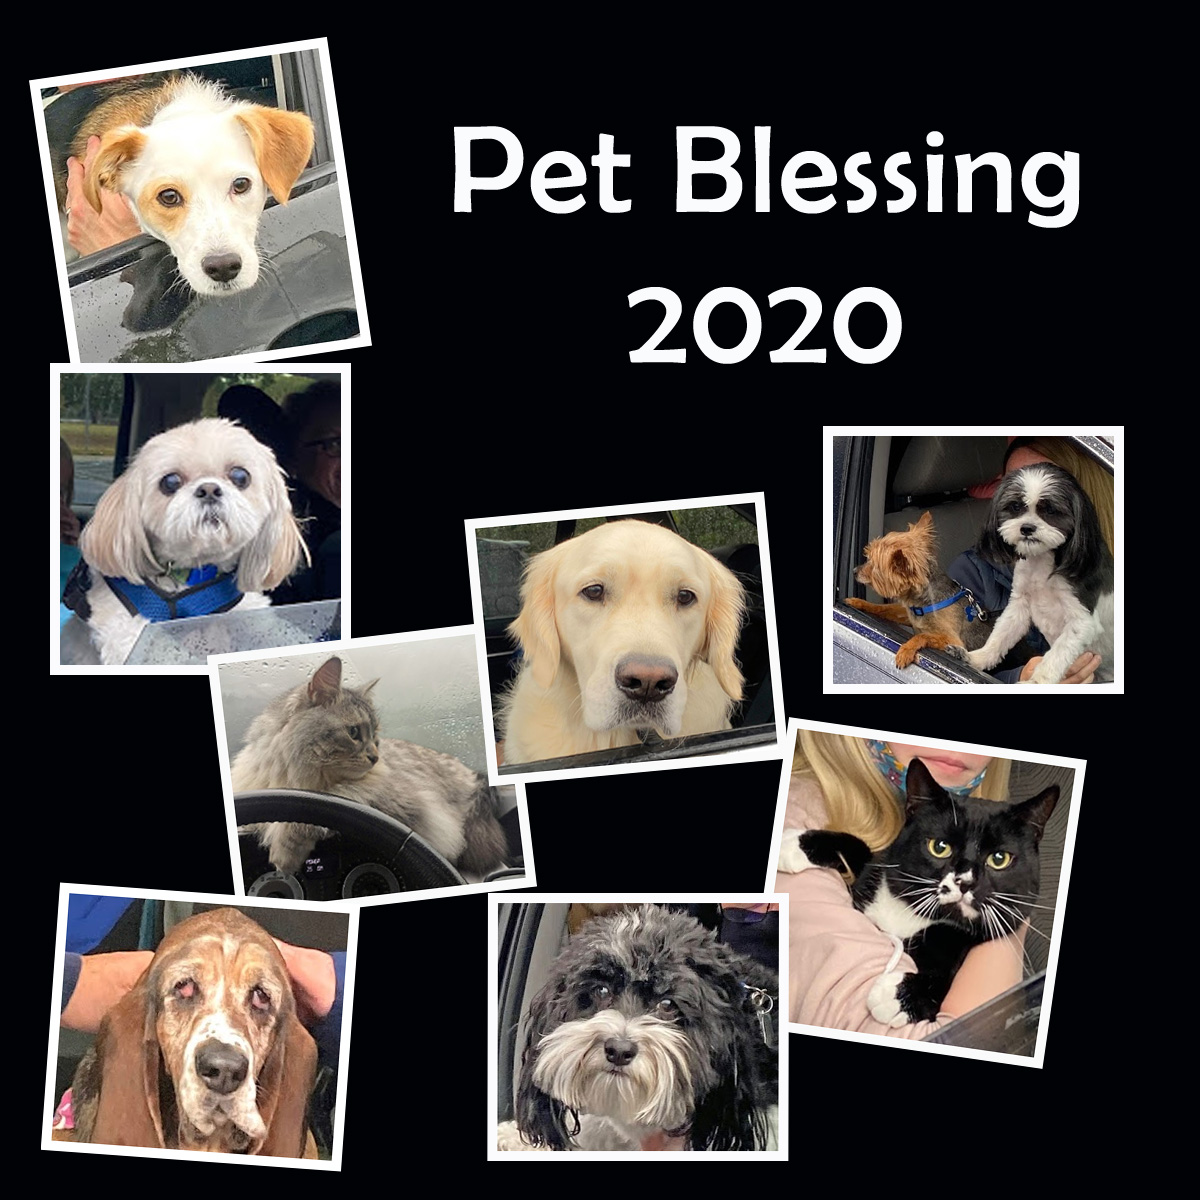 Pet Blessing 2020 Holy Family Episcopal Church